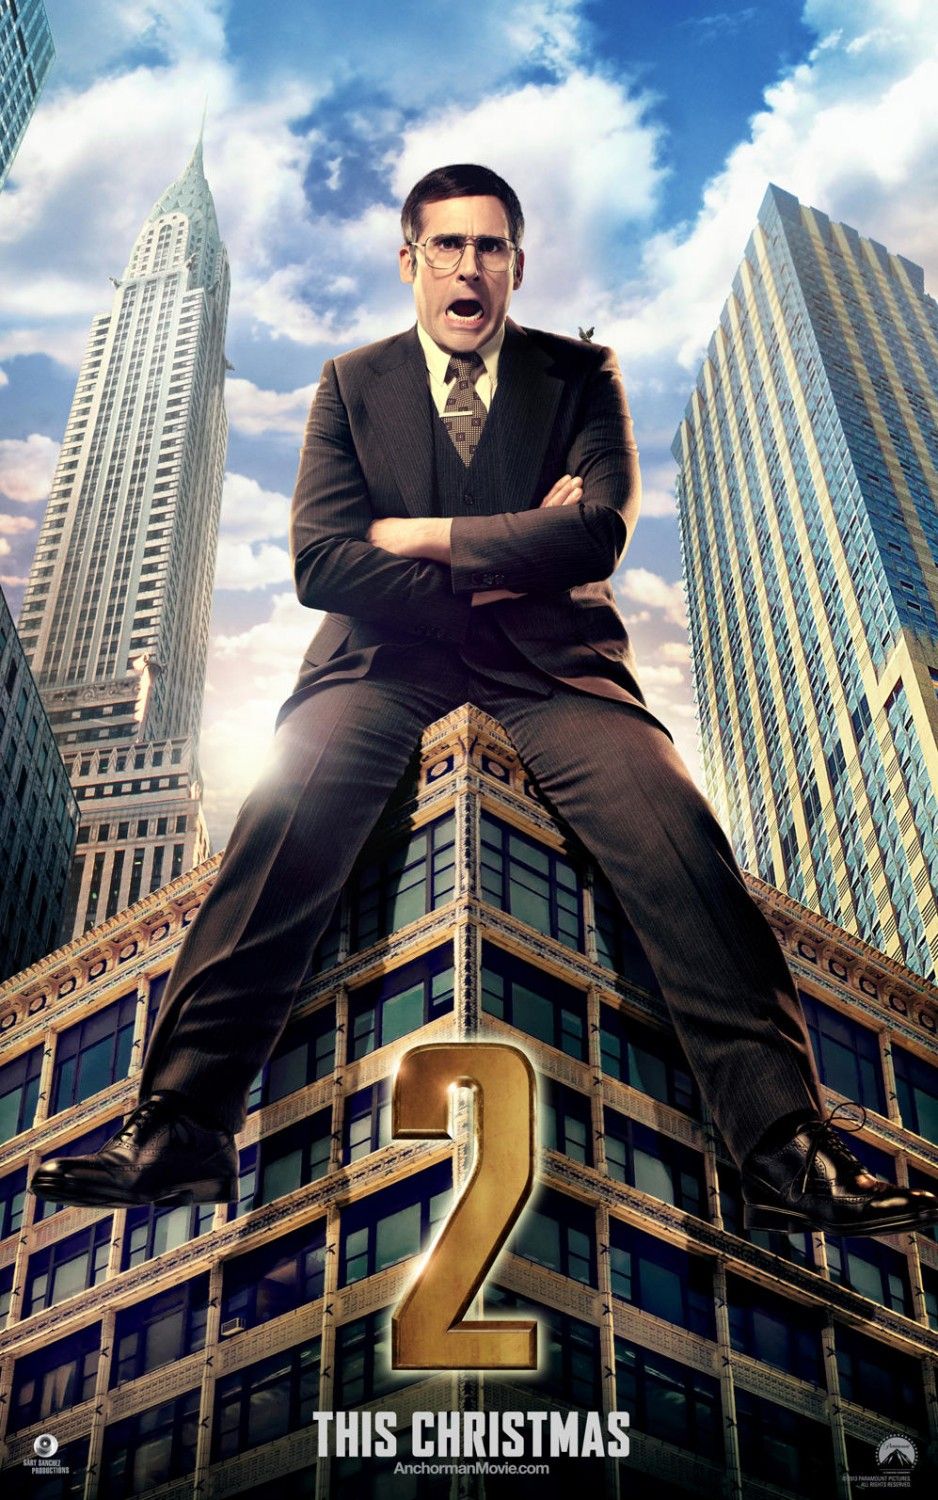 Anchorman 2 the legend continues movie wallpaper 2013